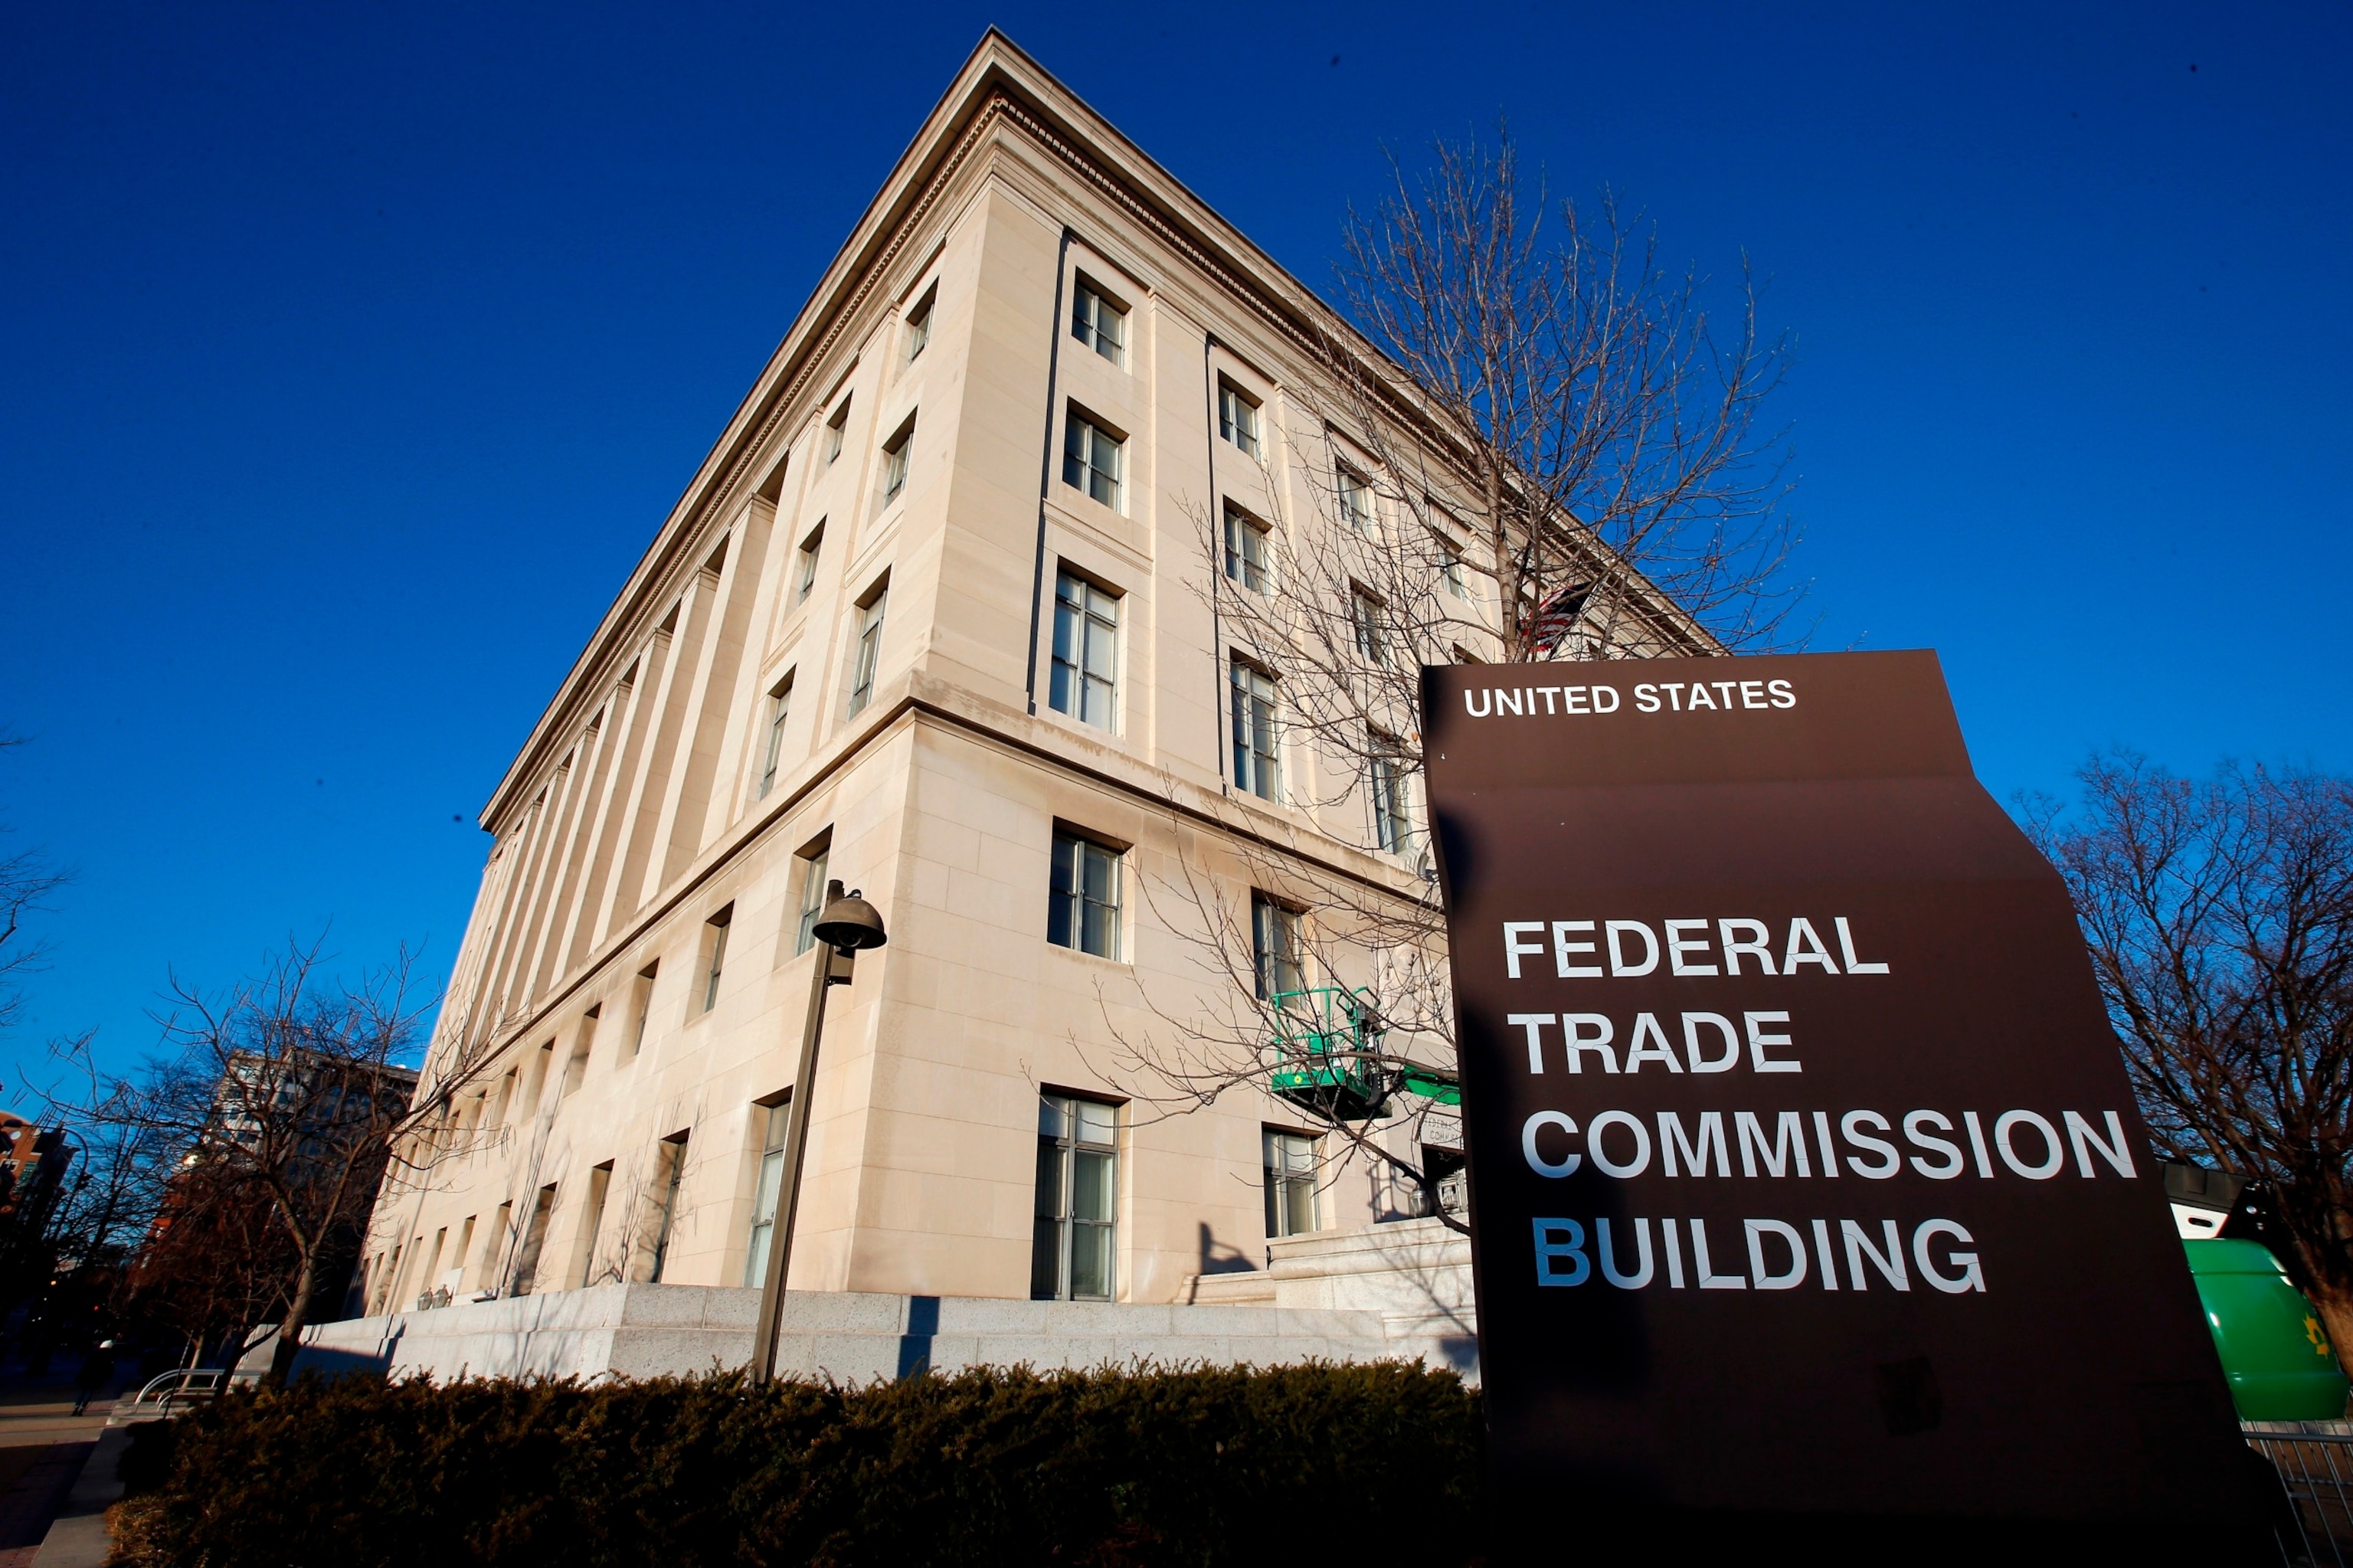 PHOTO: The Federal Trade Commission building in Washington D.C., Jan. 28, 2015.